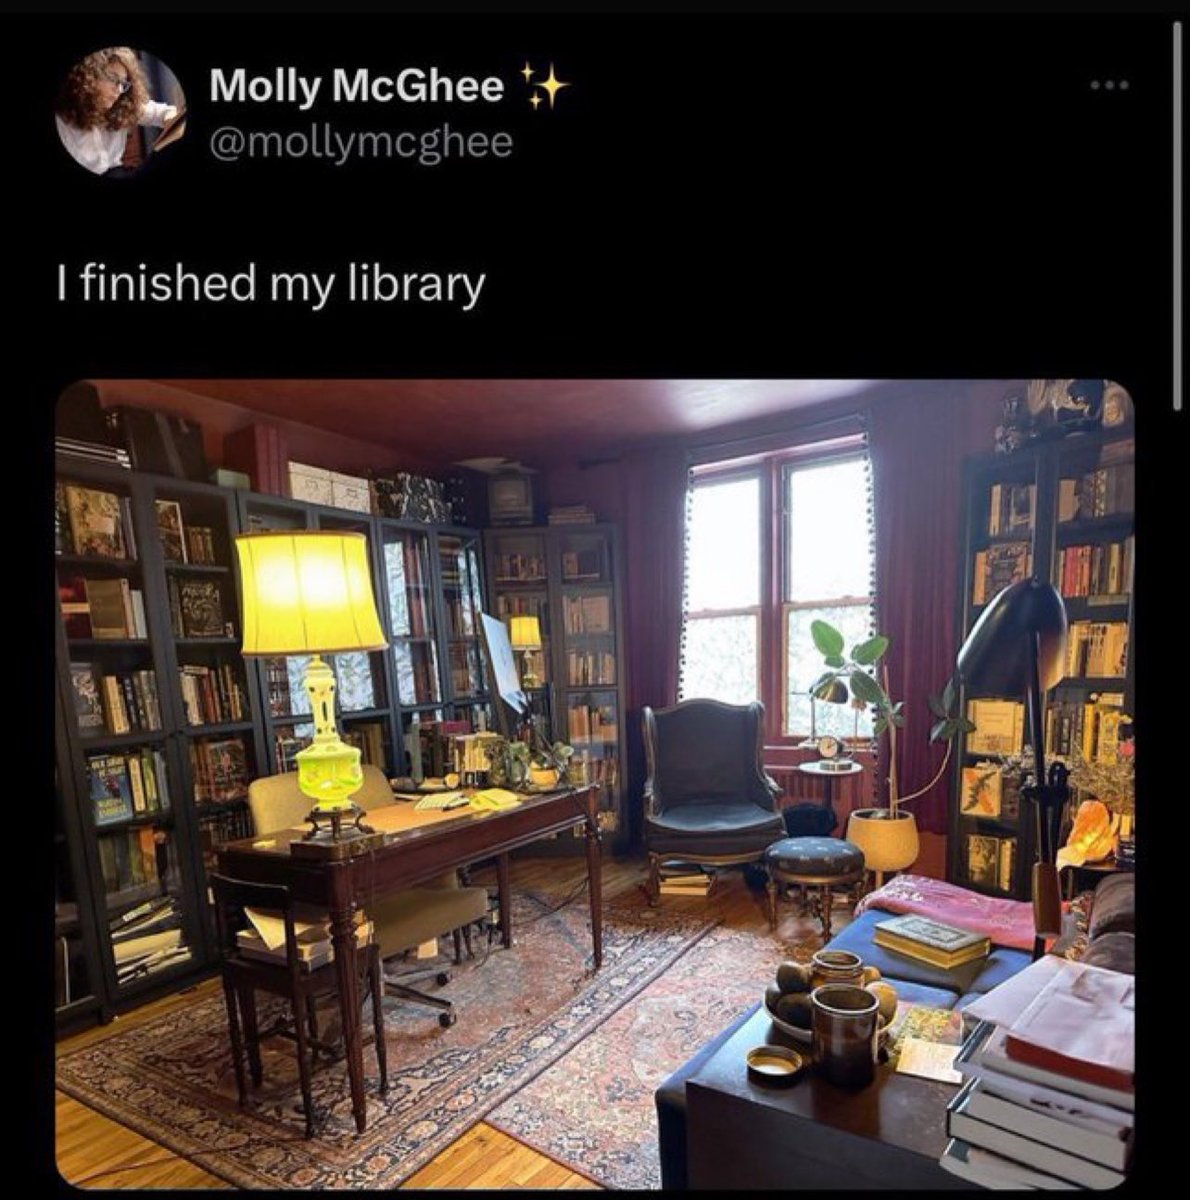 American poverty = not having everything you want when you want it. American poverty = being a part of the wealthiest 3% compared to poverty ANYWHERE ELSE. American poverty = this middle class white liberal woman whining about how poor she is from her smartphone in her LIBRARY.